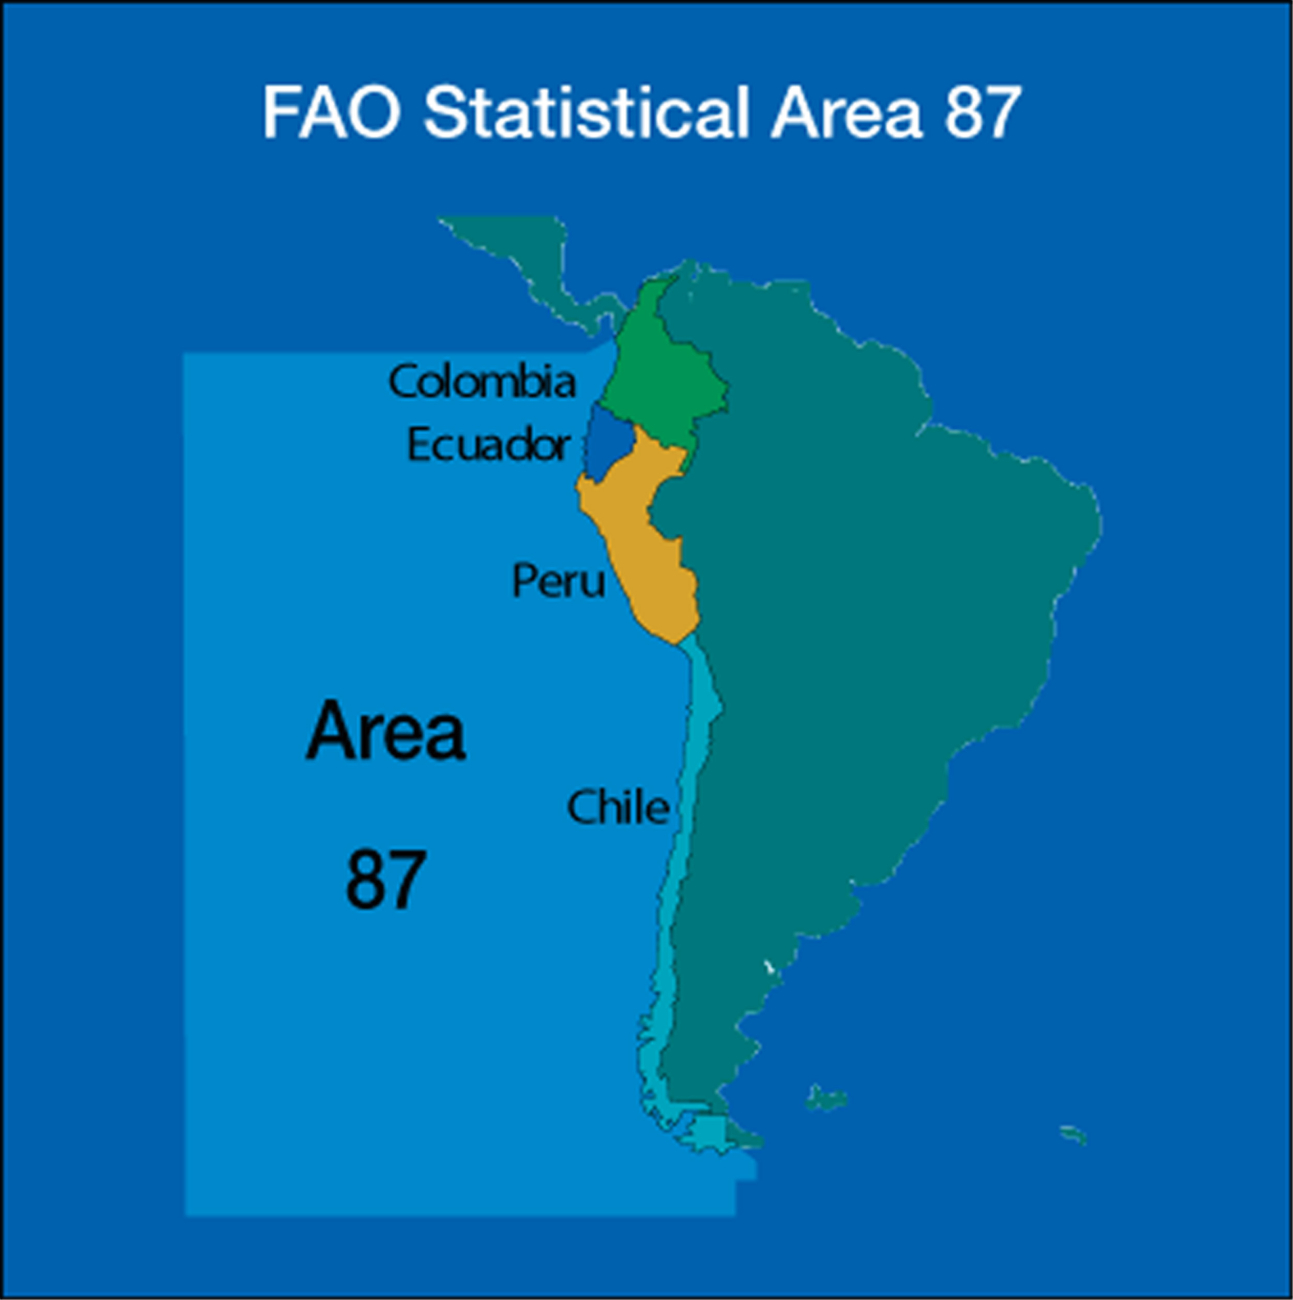 The Southeast portion of the Pacific Ocean corresponds to the United NationsFood and Agriculture Organization (FAO) Area 87